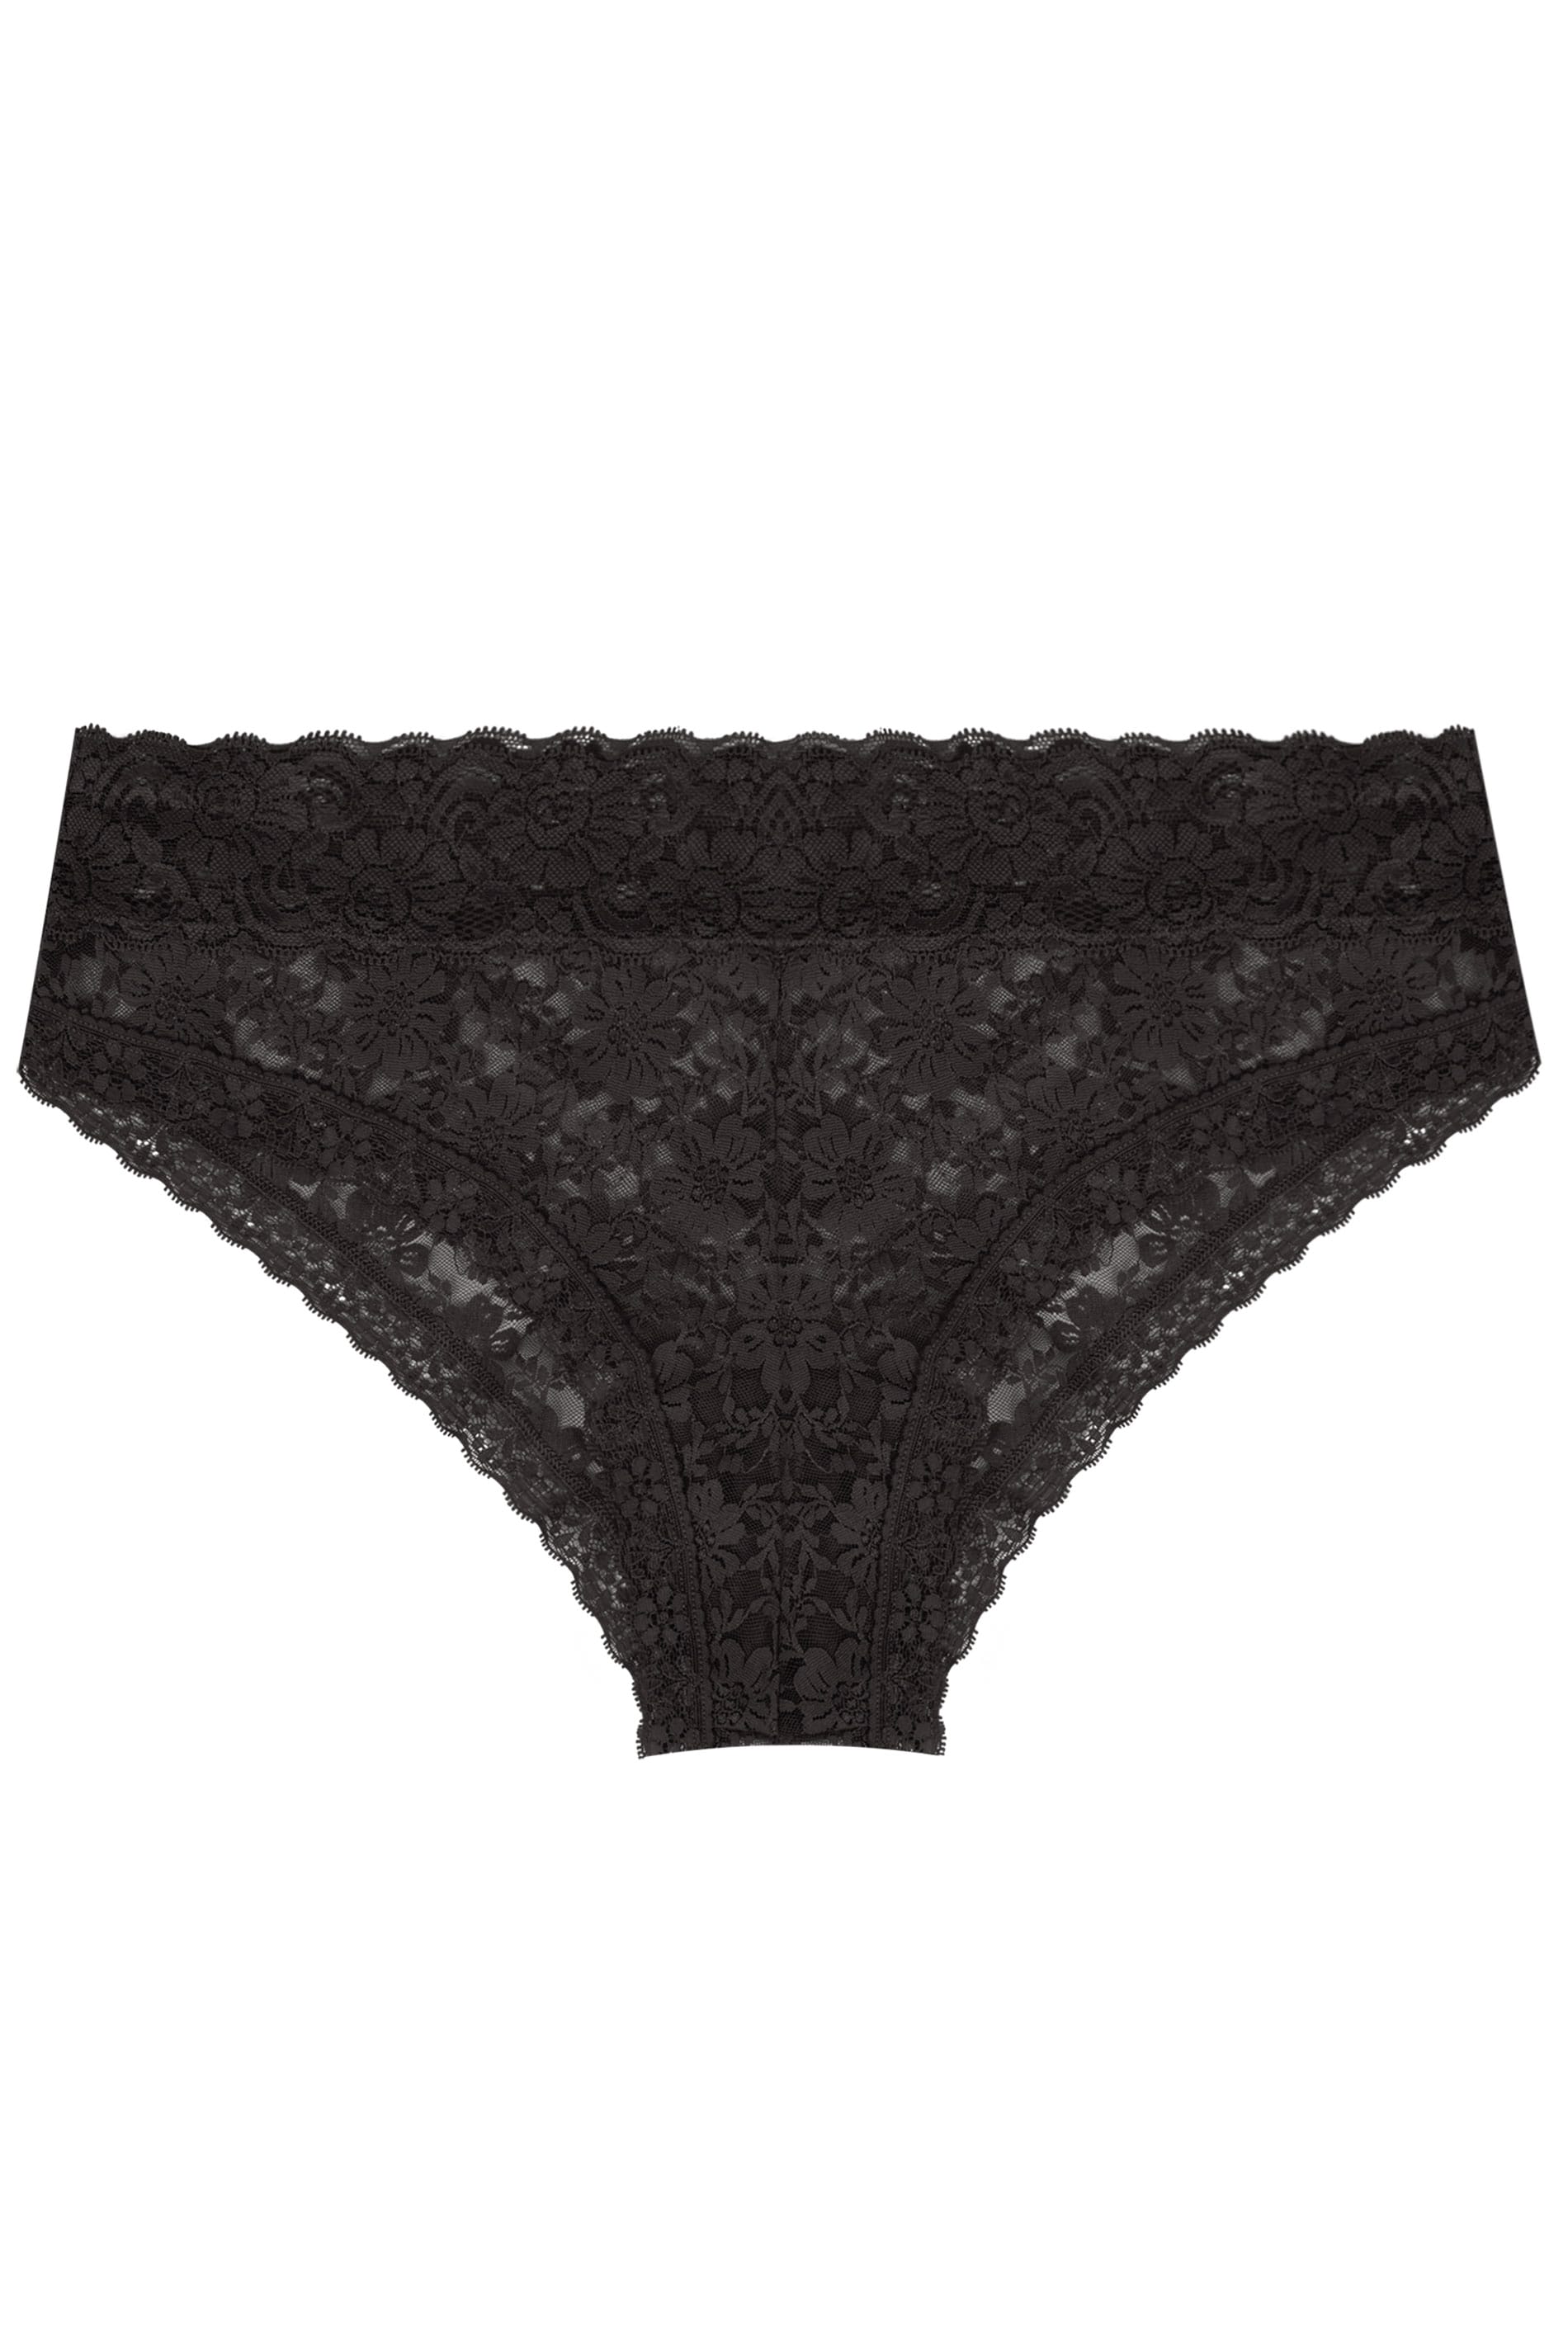 Black Lace Low Rise Brazilian Knickers | Yours Clothing 3